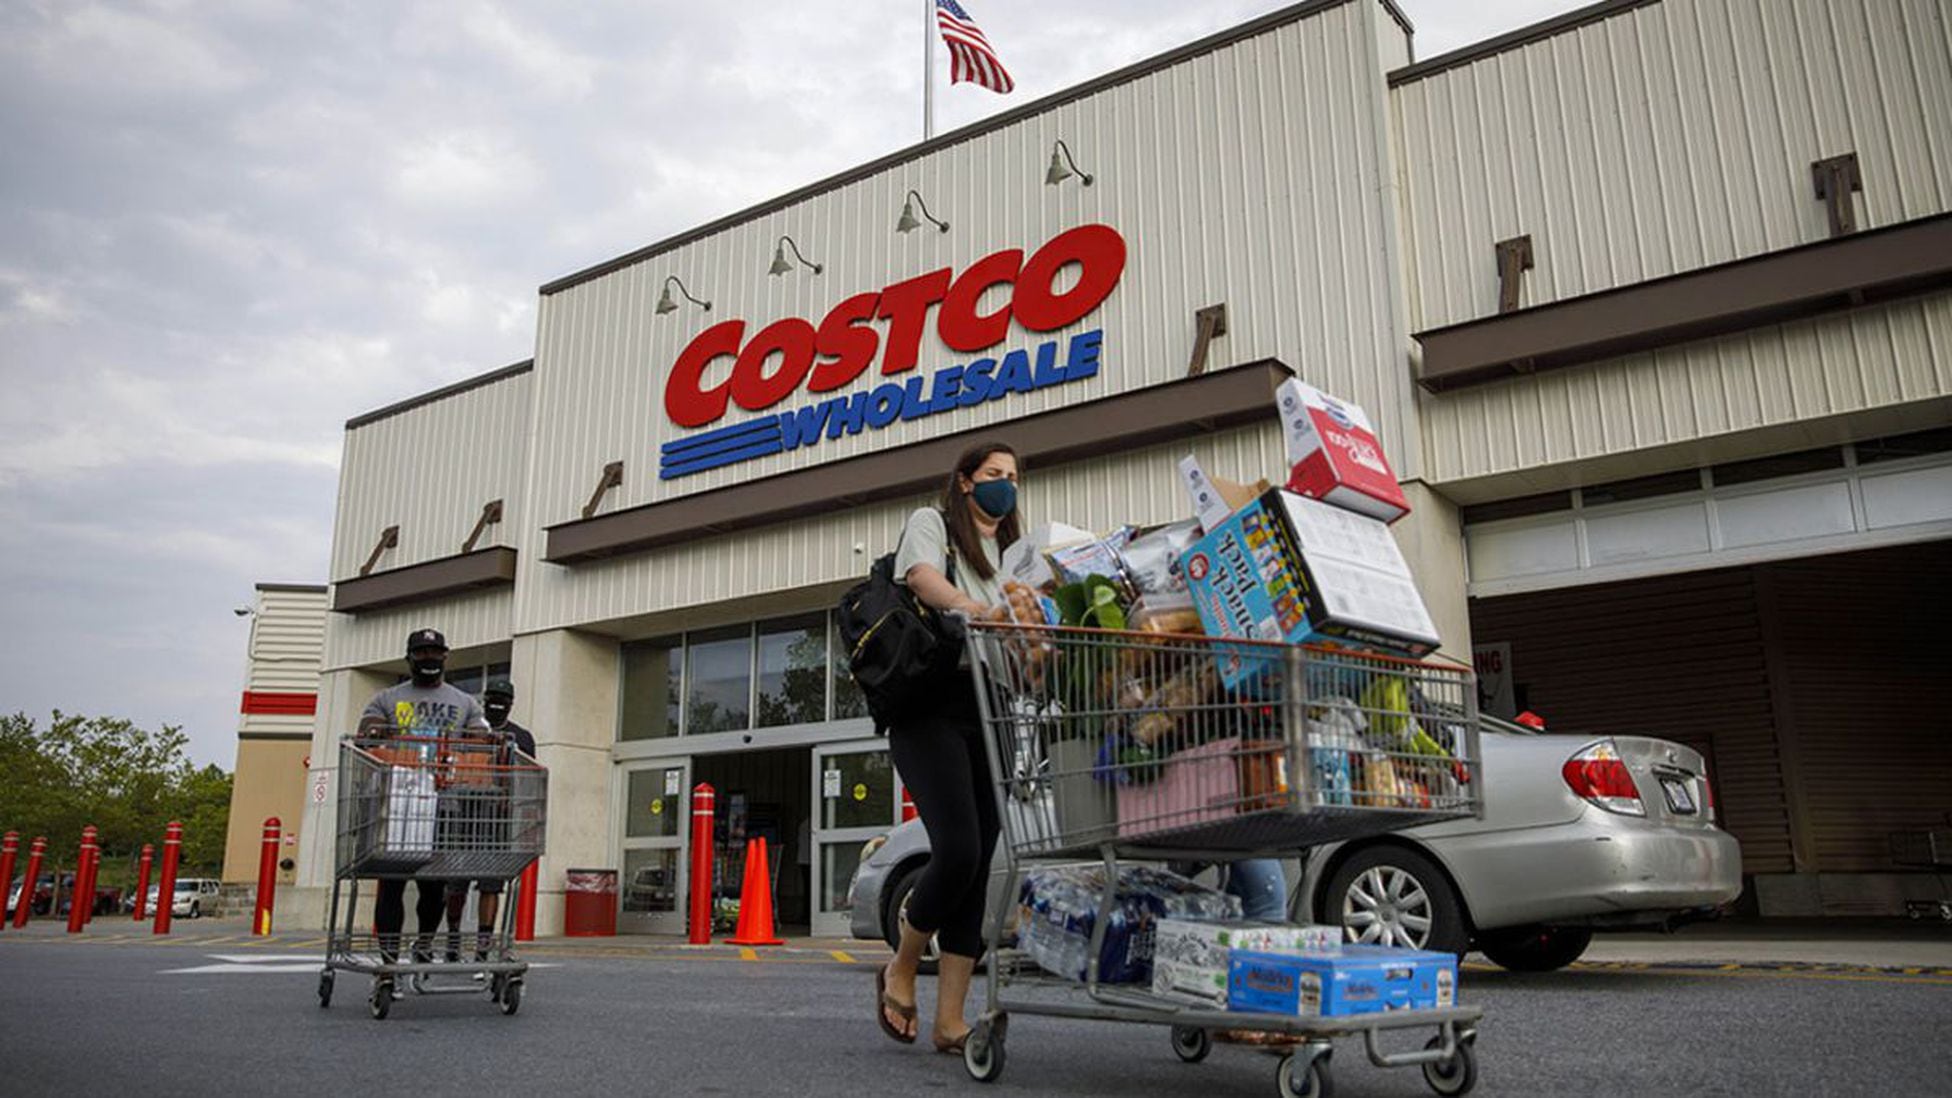 What products cost more at Costco than at other U.S. stores